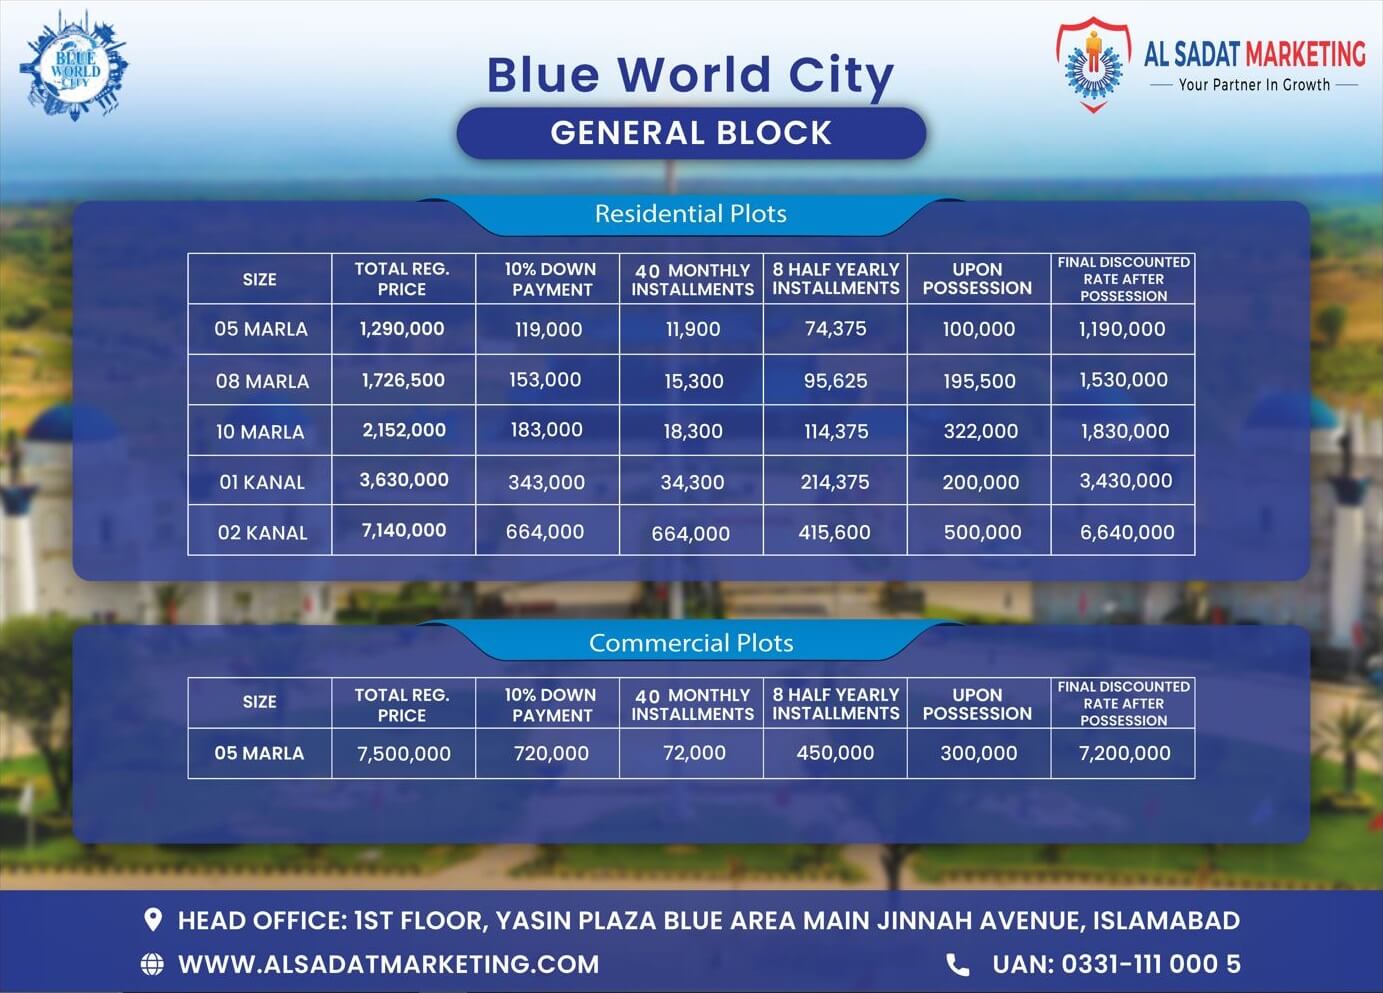 blue world city general block residential and commercial plots updated payment plan – blue world city islamabad general block residential and commercial plots updated payment plan – blue world city rawalpindi general block residential plots and commercial updated payment plan – blue world city general block latest payment plan – blue world city islamabad general block latest payment plan – blue world city rawalpindi general block latest payment plan – blue world city payment plan – blue world city islamabad payment plan - blue world city rawalpindi payment plan – blue world city– blue world city islamabad – blue world city rawalpindi– blue world city housing society – blue world city islamabad housing society – blue world city real estate project – blue world city islamabad real estate project - al sadat marketing - alsadat marketing - al-sadat marketing